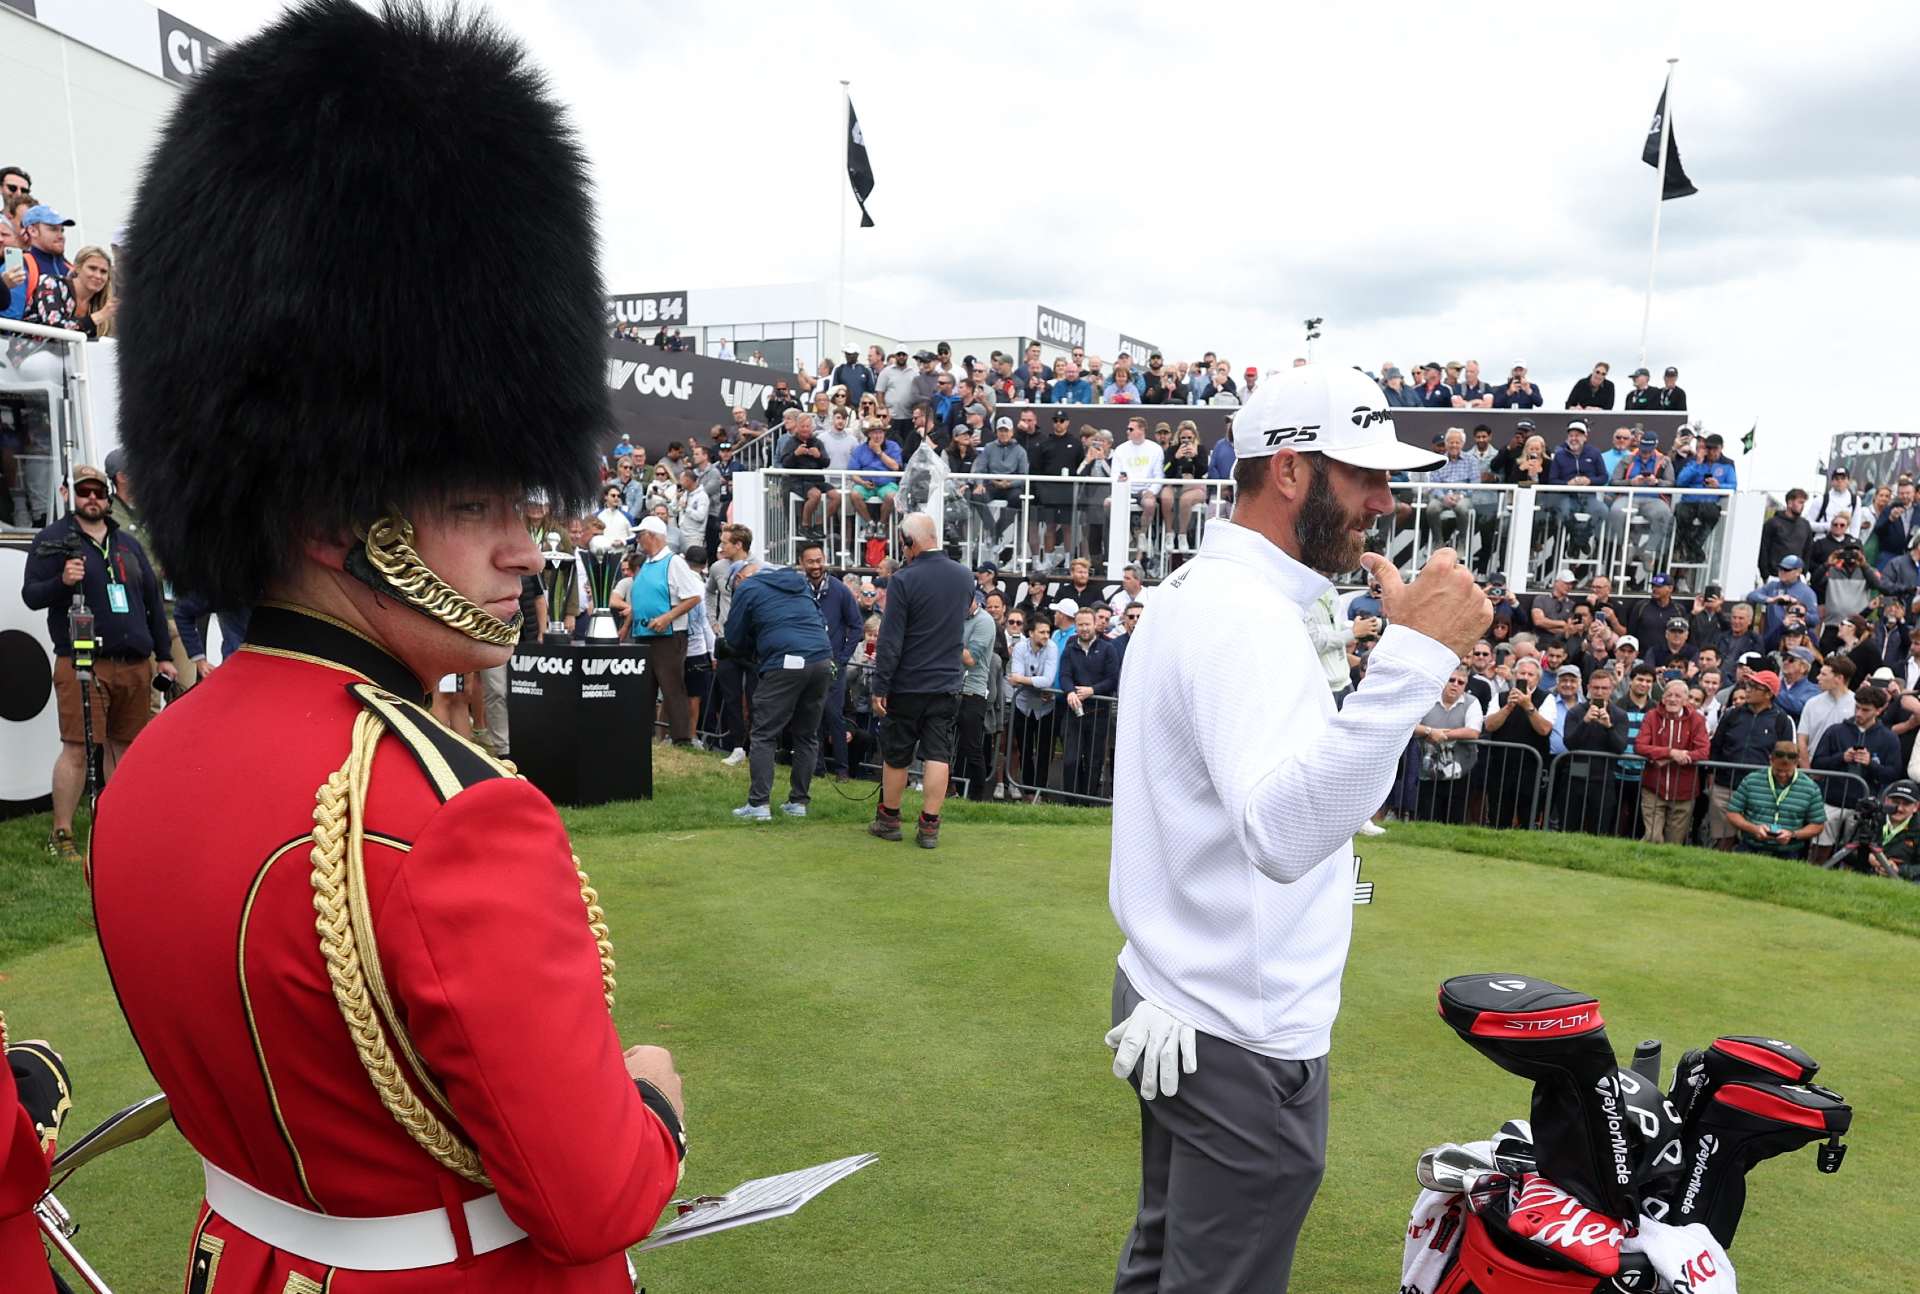 Dustin Johnson is watched by a member of brass band dressed in a costume resembling the uniform of the Grenadier Guards (Reuters)